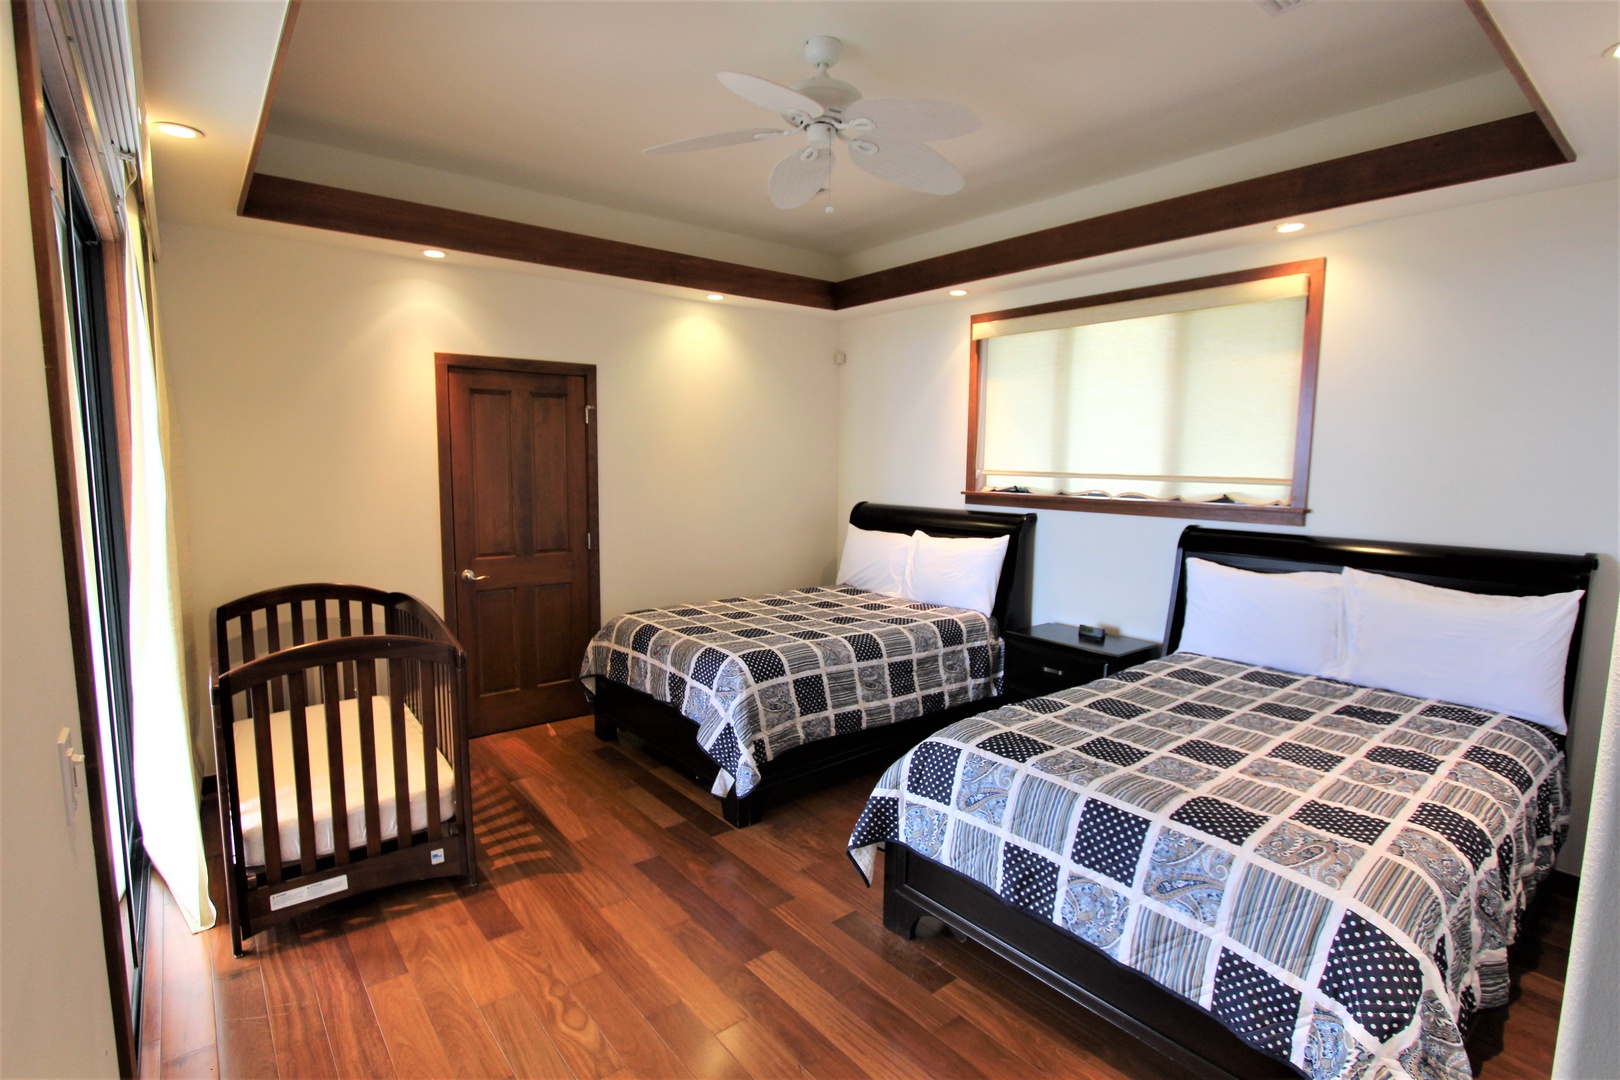 Kailua Kona Vacation Rentals, O'oma Plantation - Guest bedroom equipped with two Double beds and crib